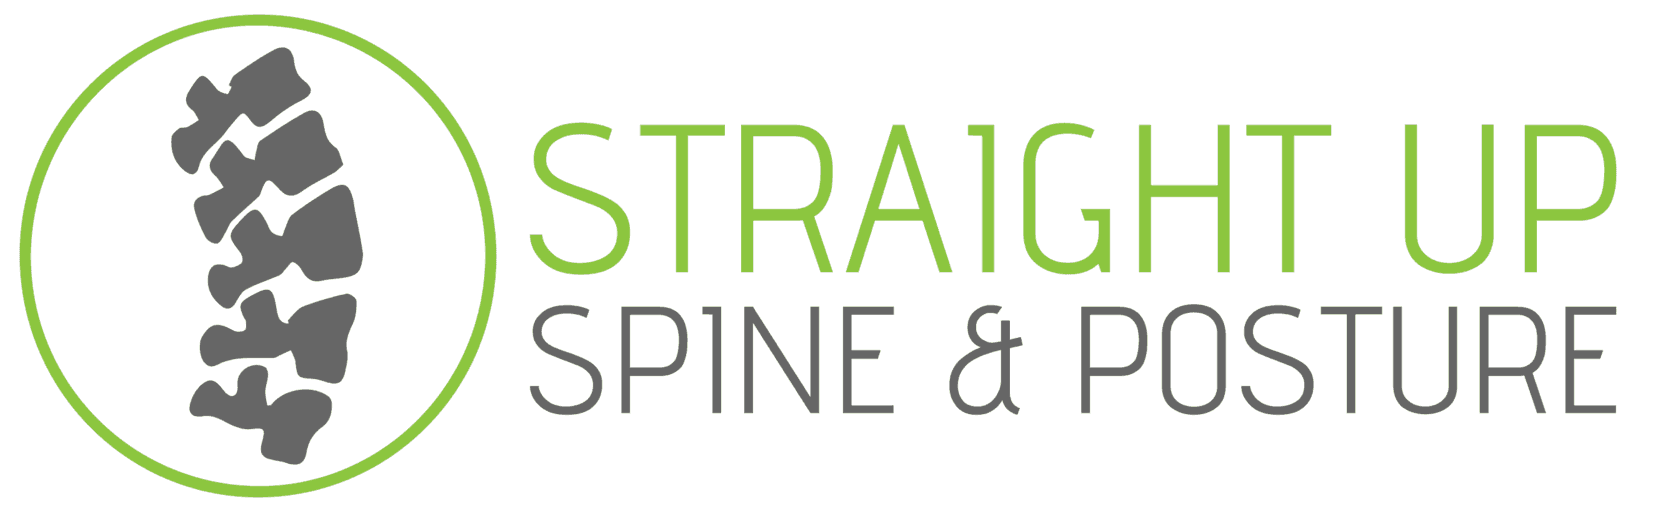 The Maintenance of Upright Posture - Straight Spine Chiropractic Courtenay  and Campbell River